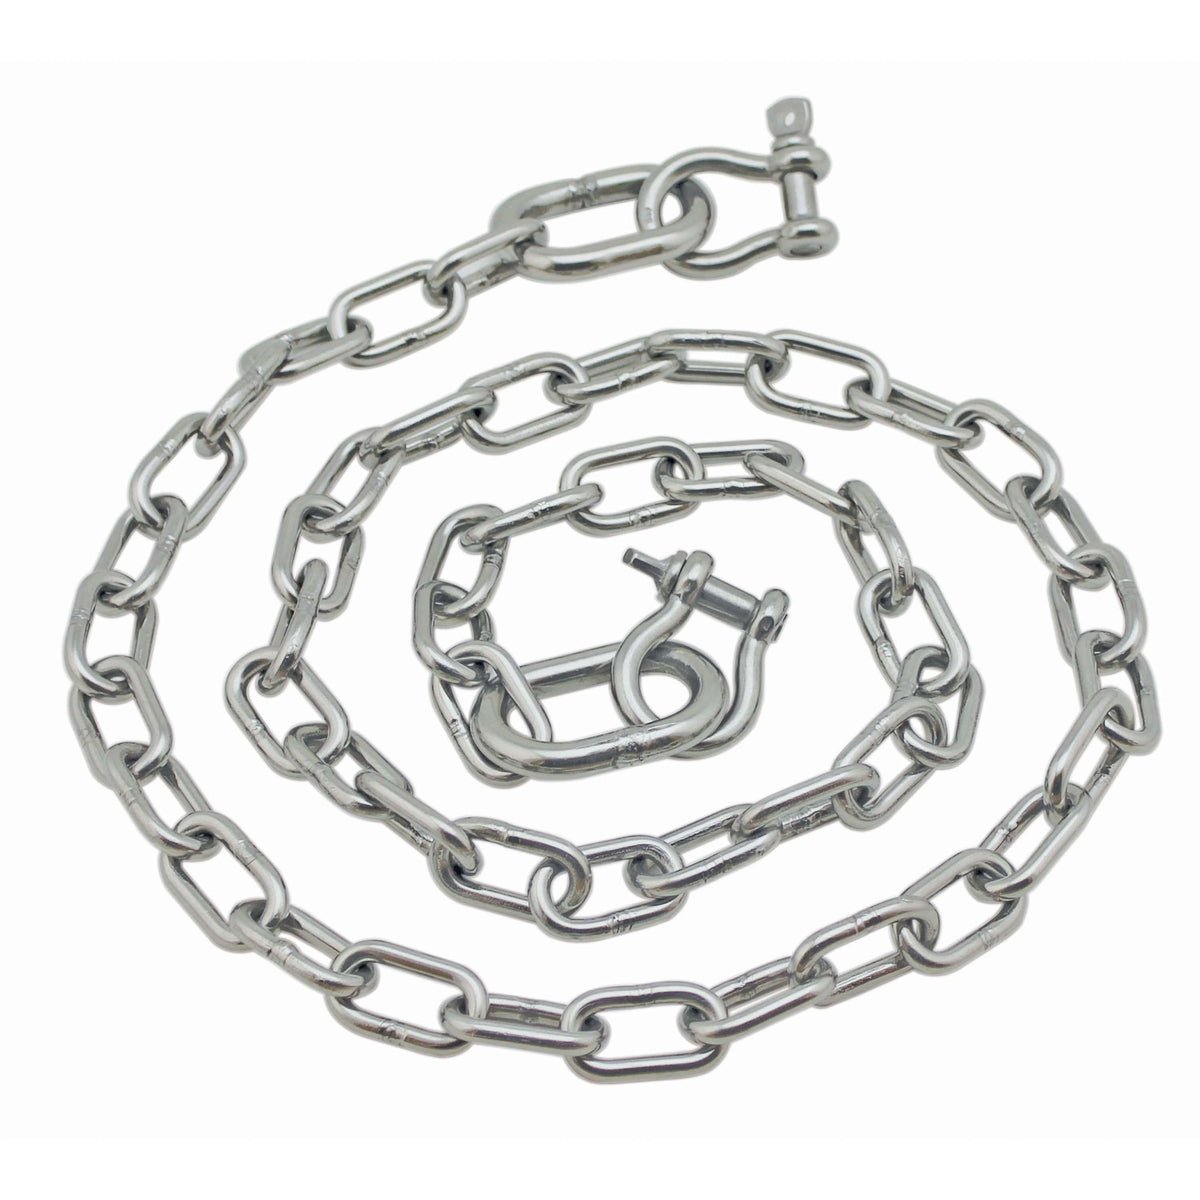 Extreme Max SS Anchor Chain 5/16" 5' 3/8" with Shackles #3006.6581